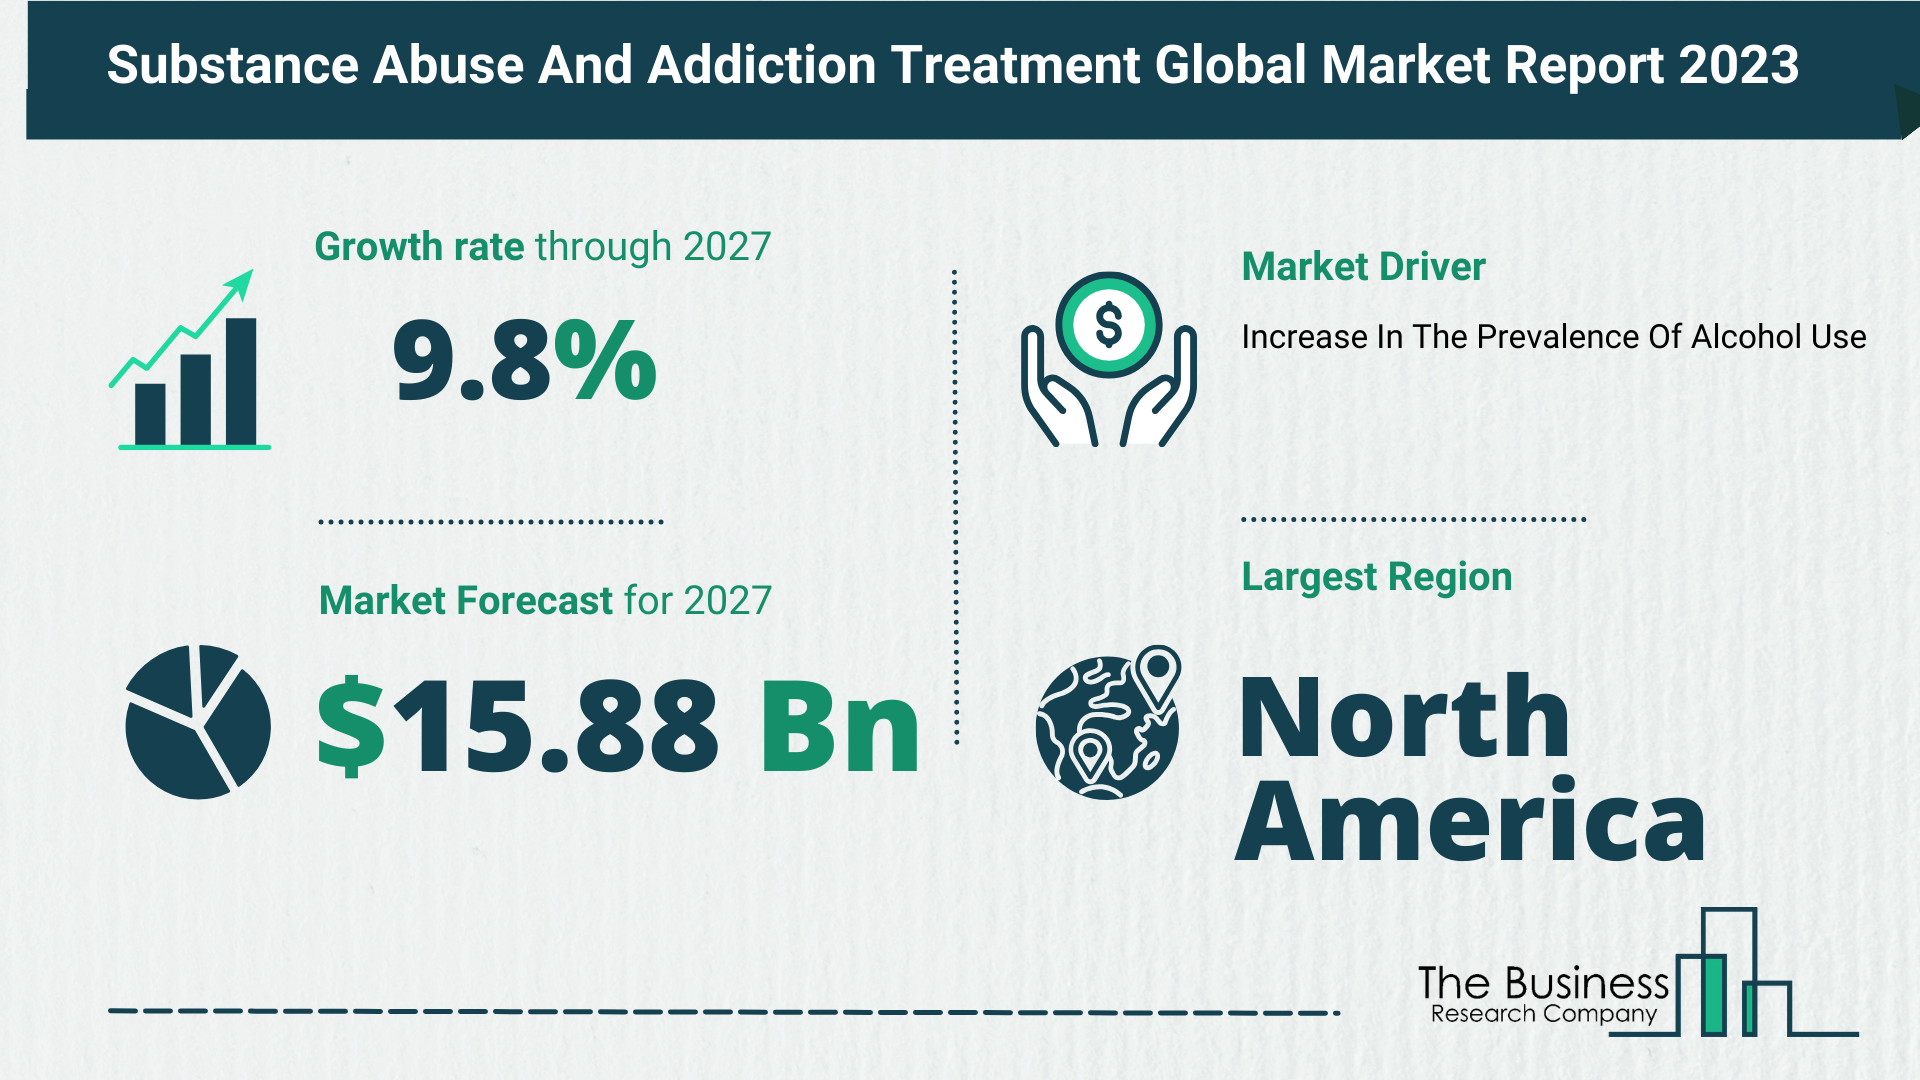 Comprehensive Analysis On Size, Share, And Drivers Of The Substance Abuse And Addiction Treatment Market